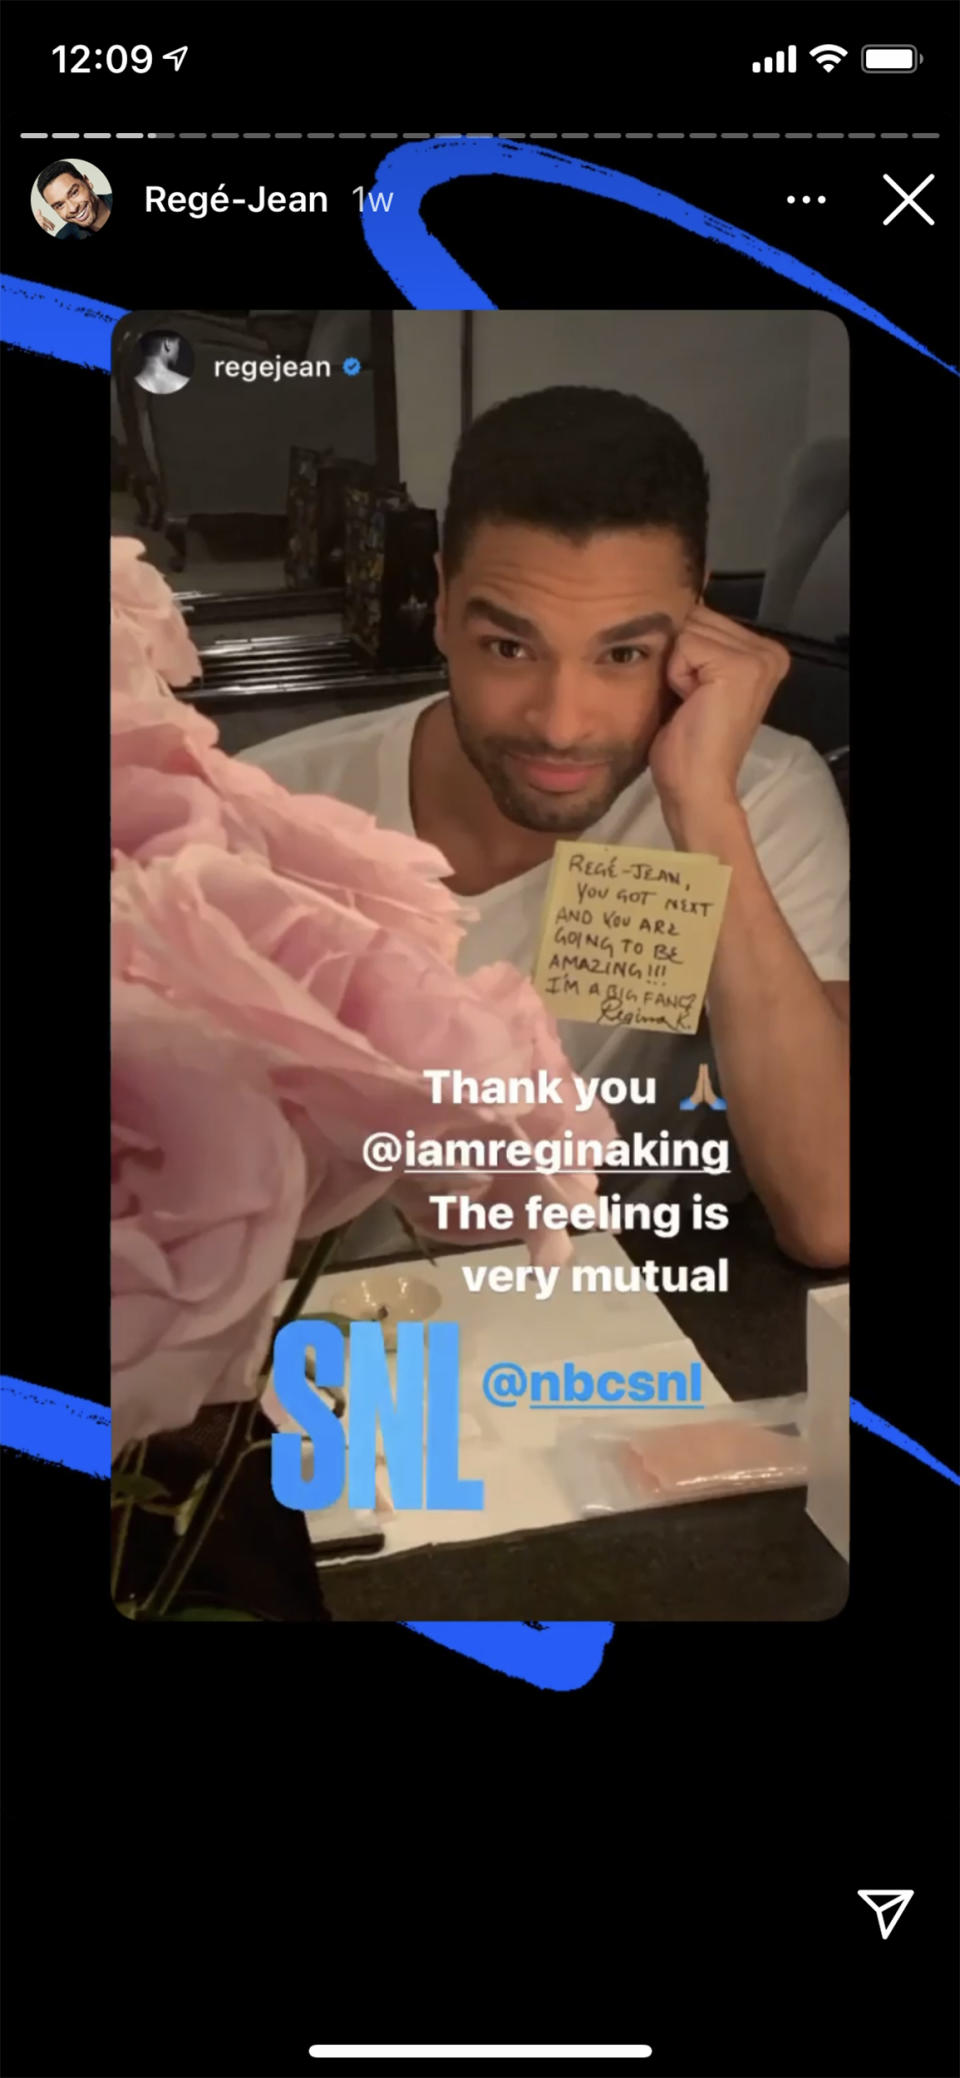 King let Regé-Jean Page know that she would be cheering him on. (Regejean / Instagram)